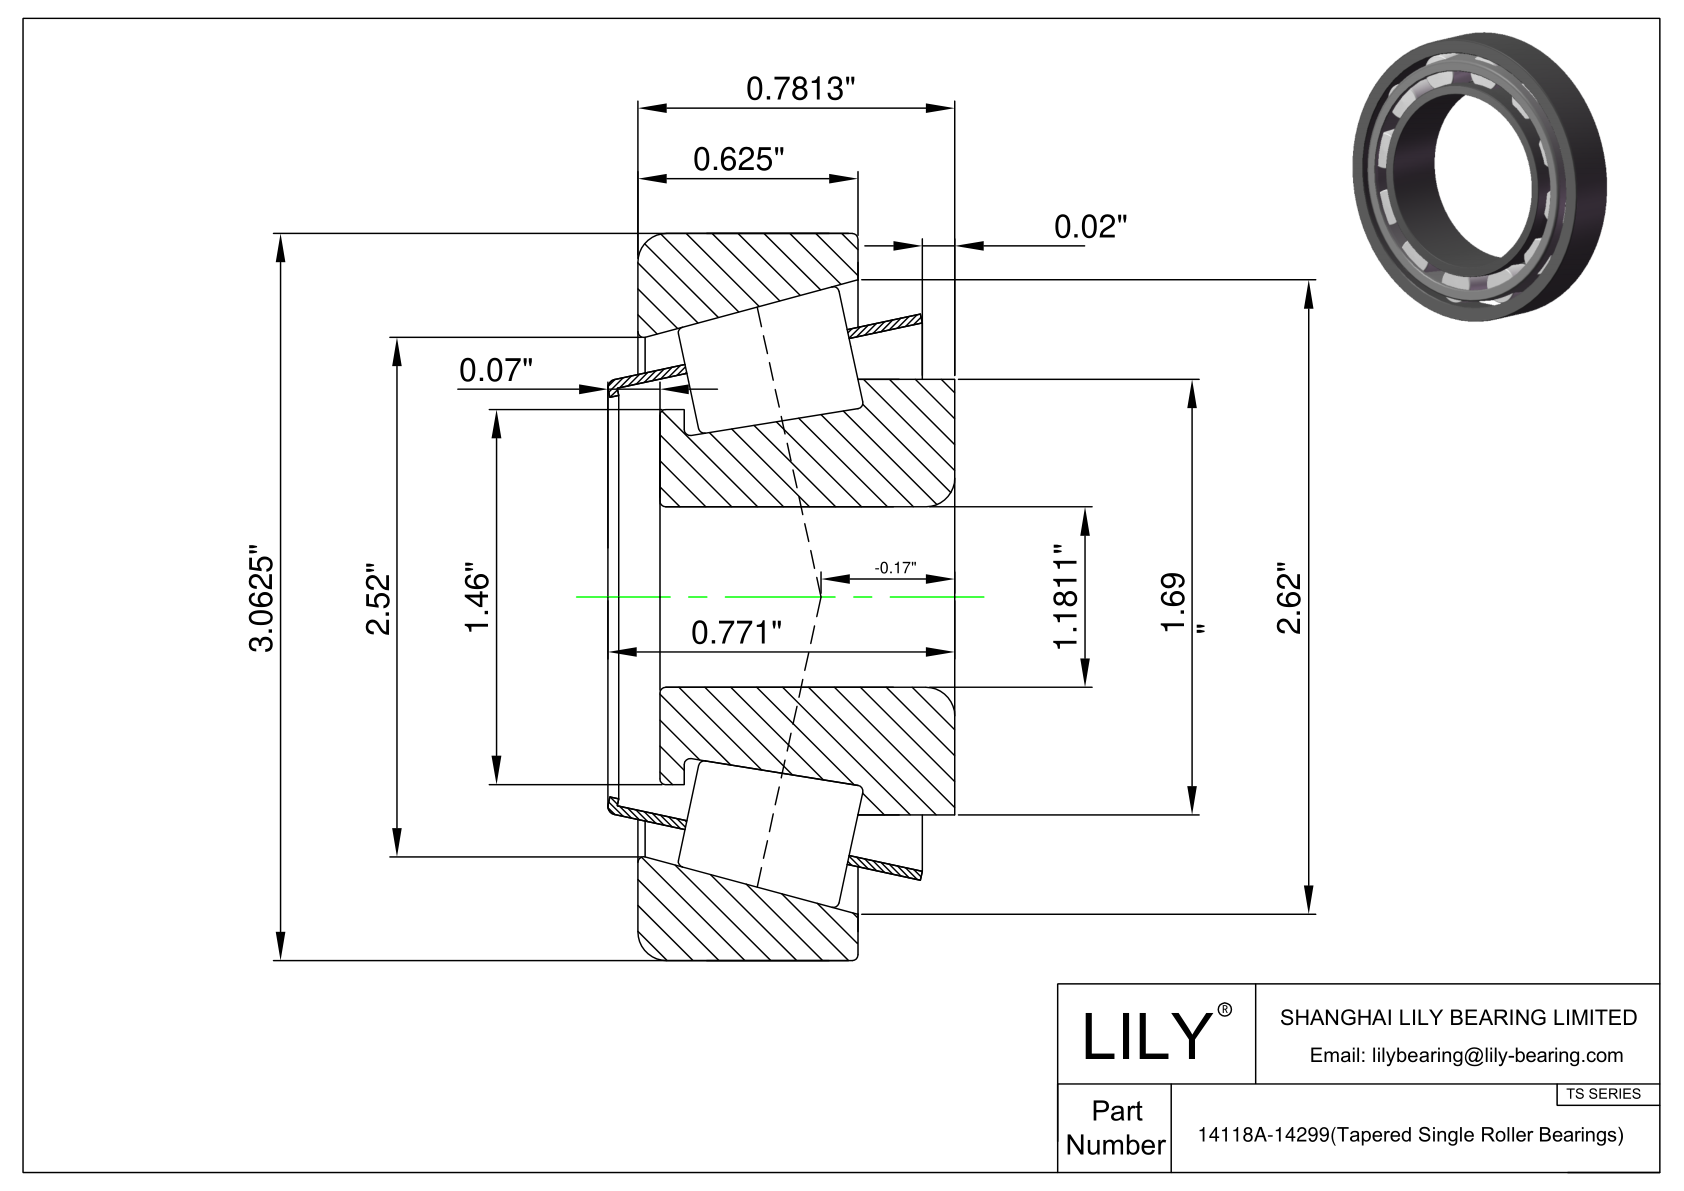 14118A-14299 TS (Tapered Single Roller Bearings) (Imperial) cad drawing